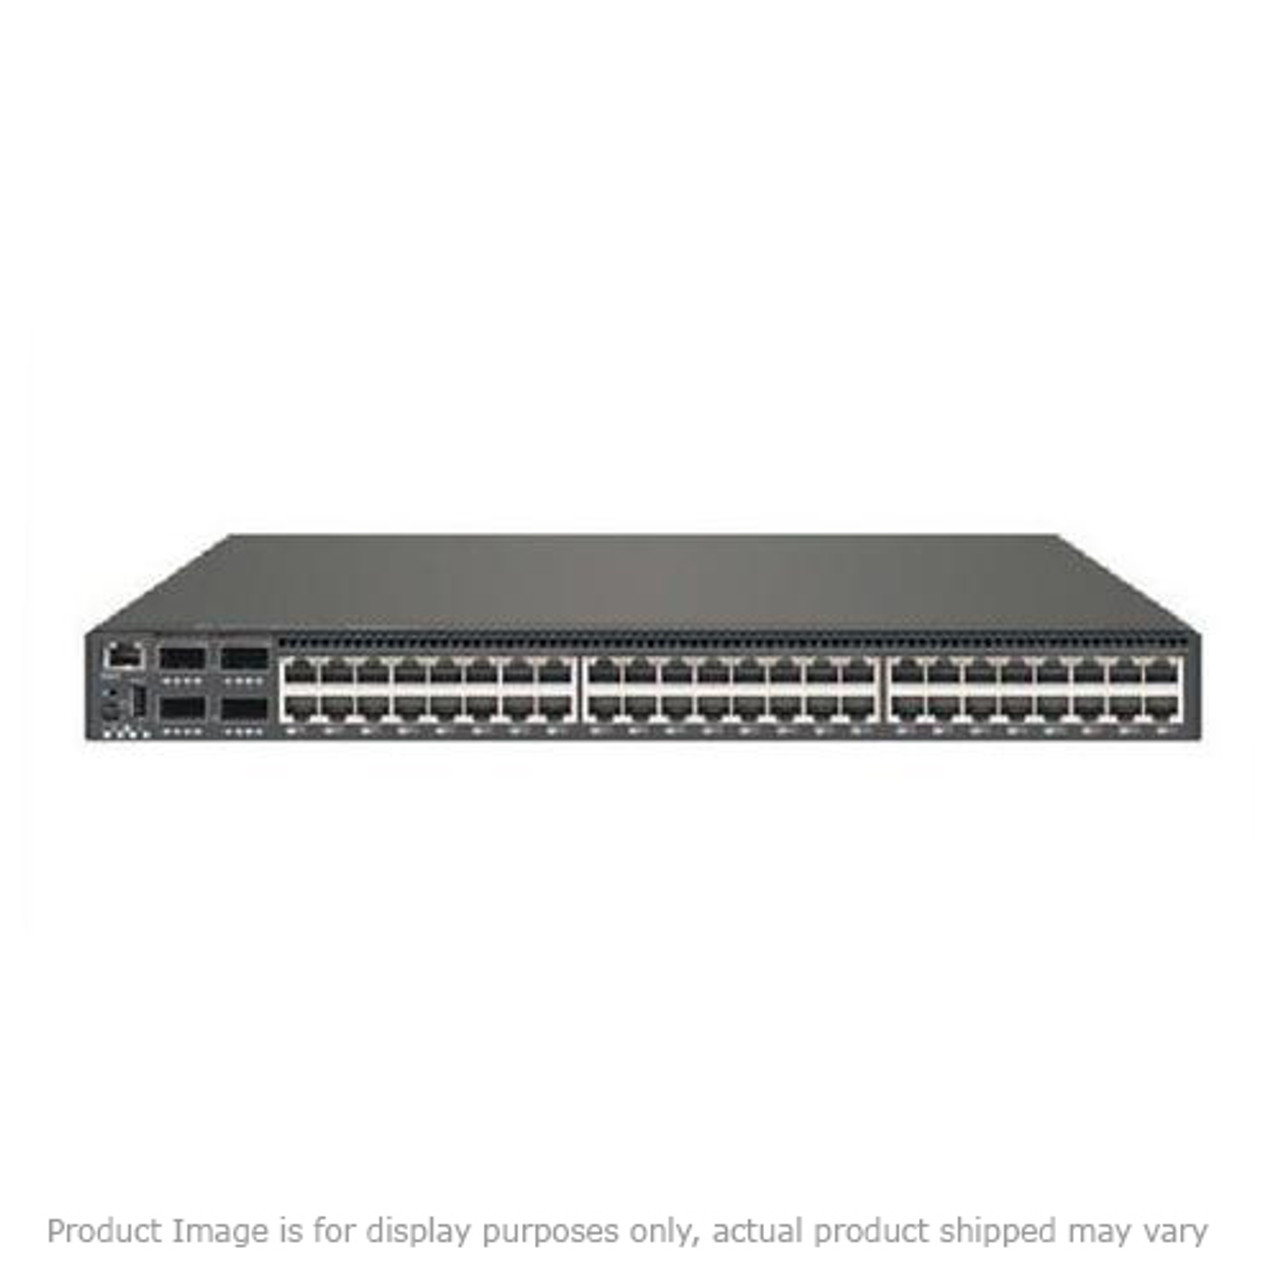 FS-500-SFP-24 Fortinet FortiSwitch FS-500-SFP-24 Switch Chassis Manageable 24 x Expansion Slots 10/100/1000Base-T (Refurbished)